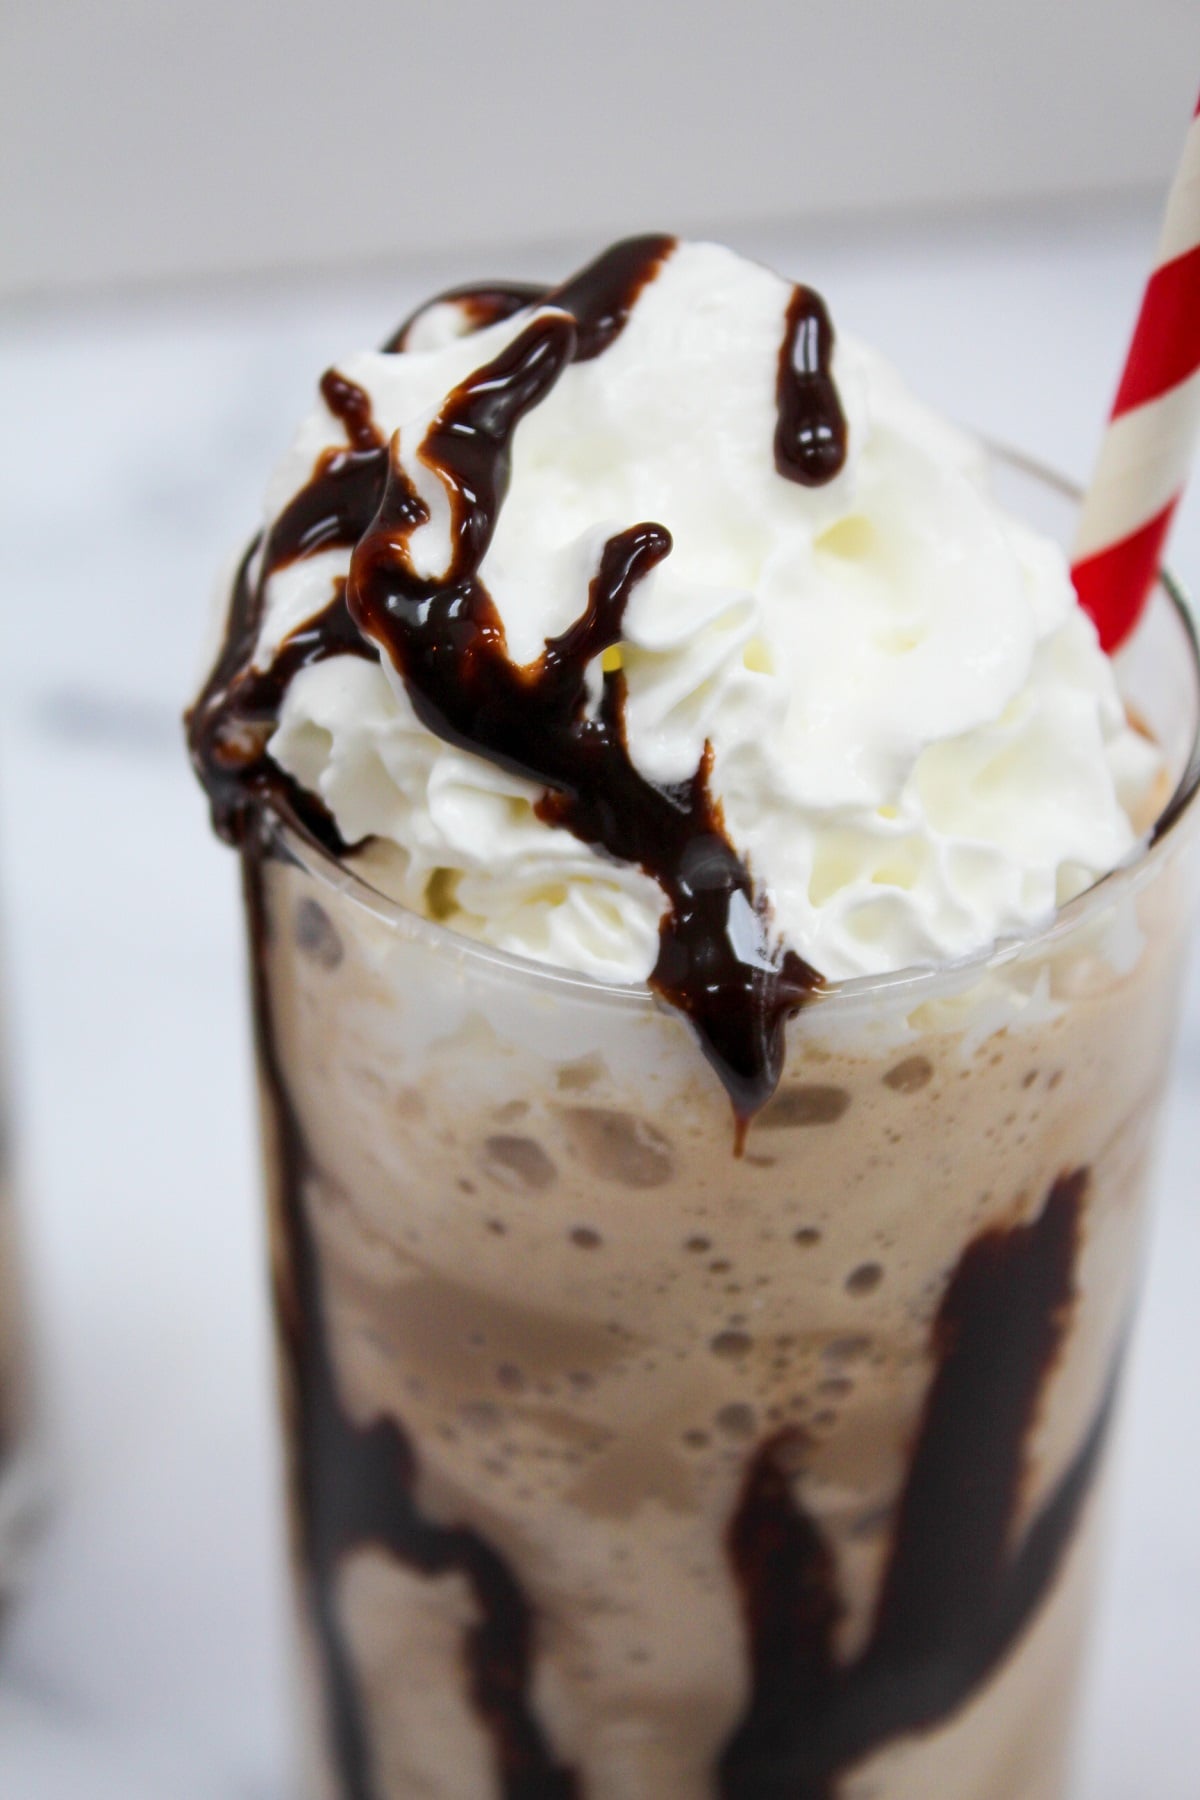 Blended Mocha Frappe with red and white straw